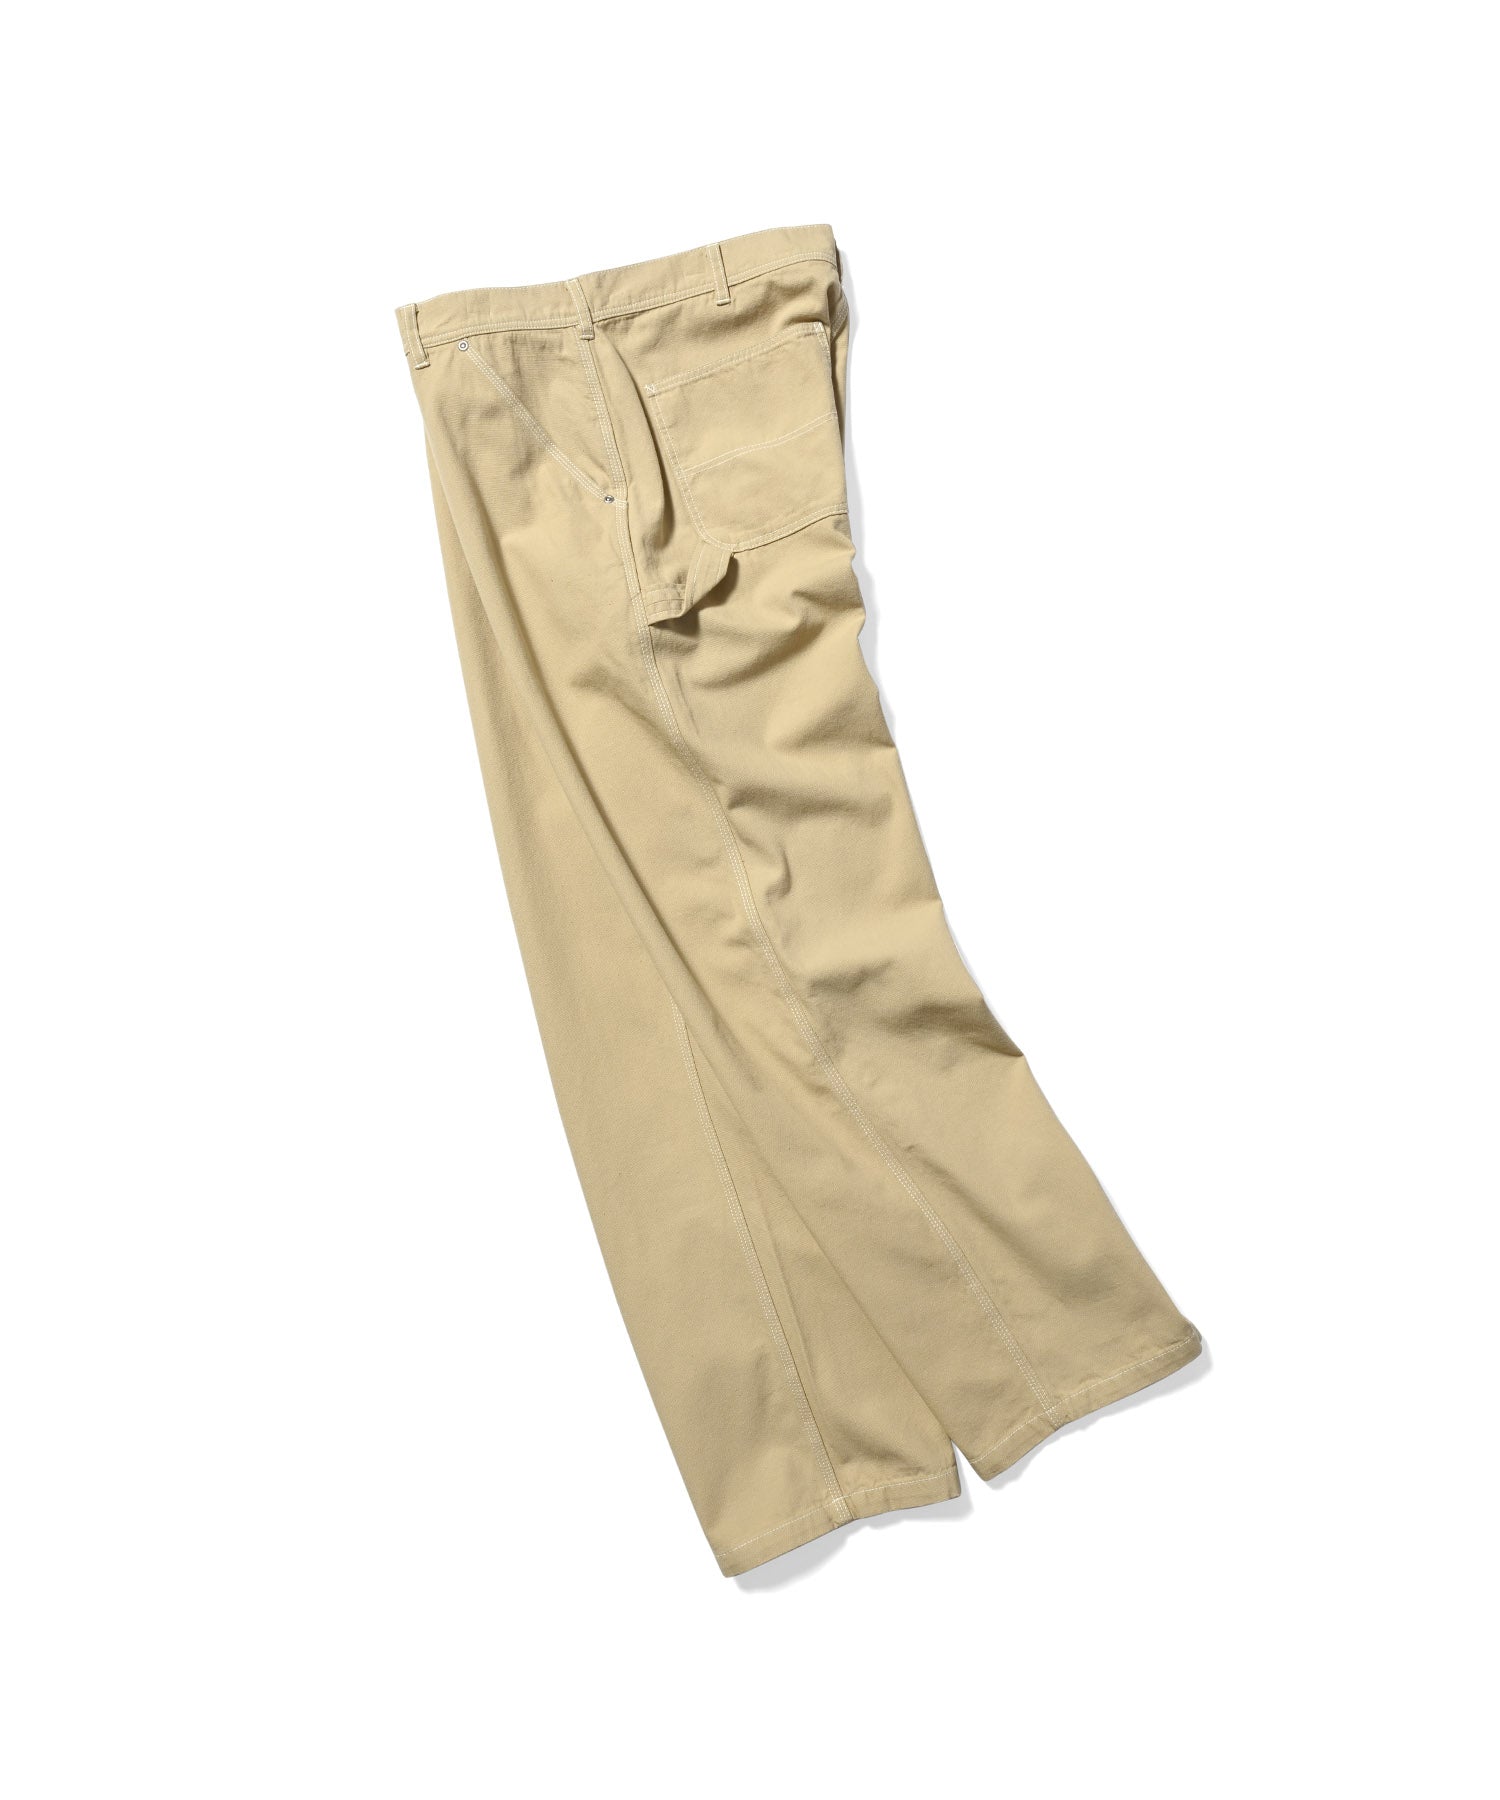 LFYT OLD OVAL LOGO DUCK PAINTER PANTS LS231204